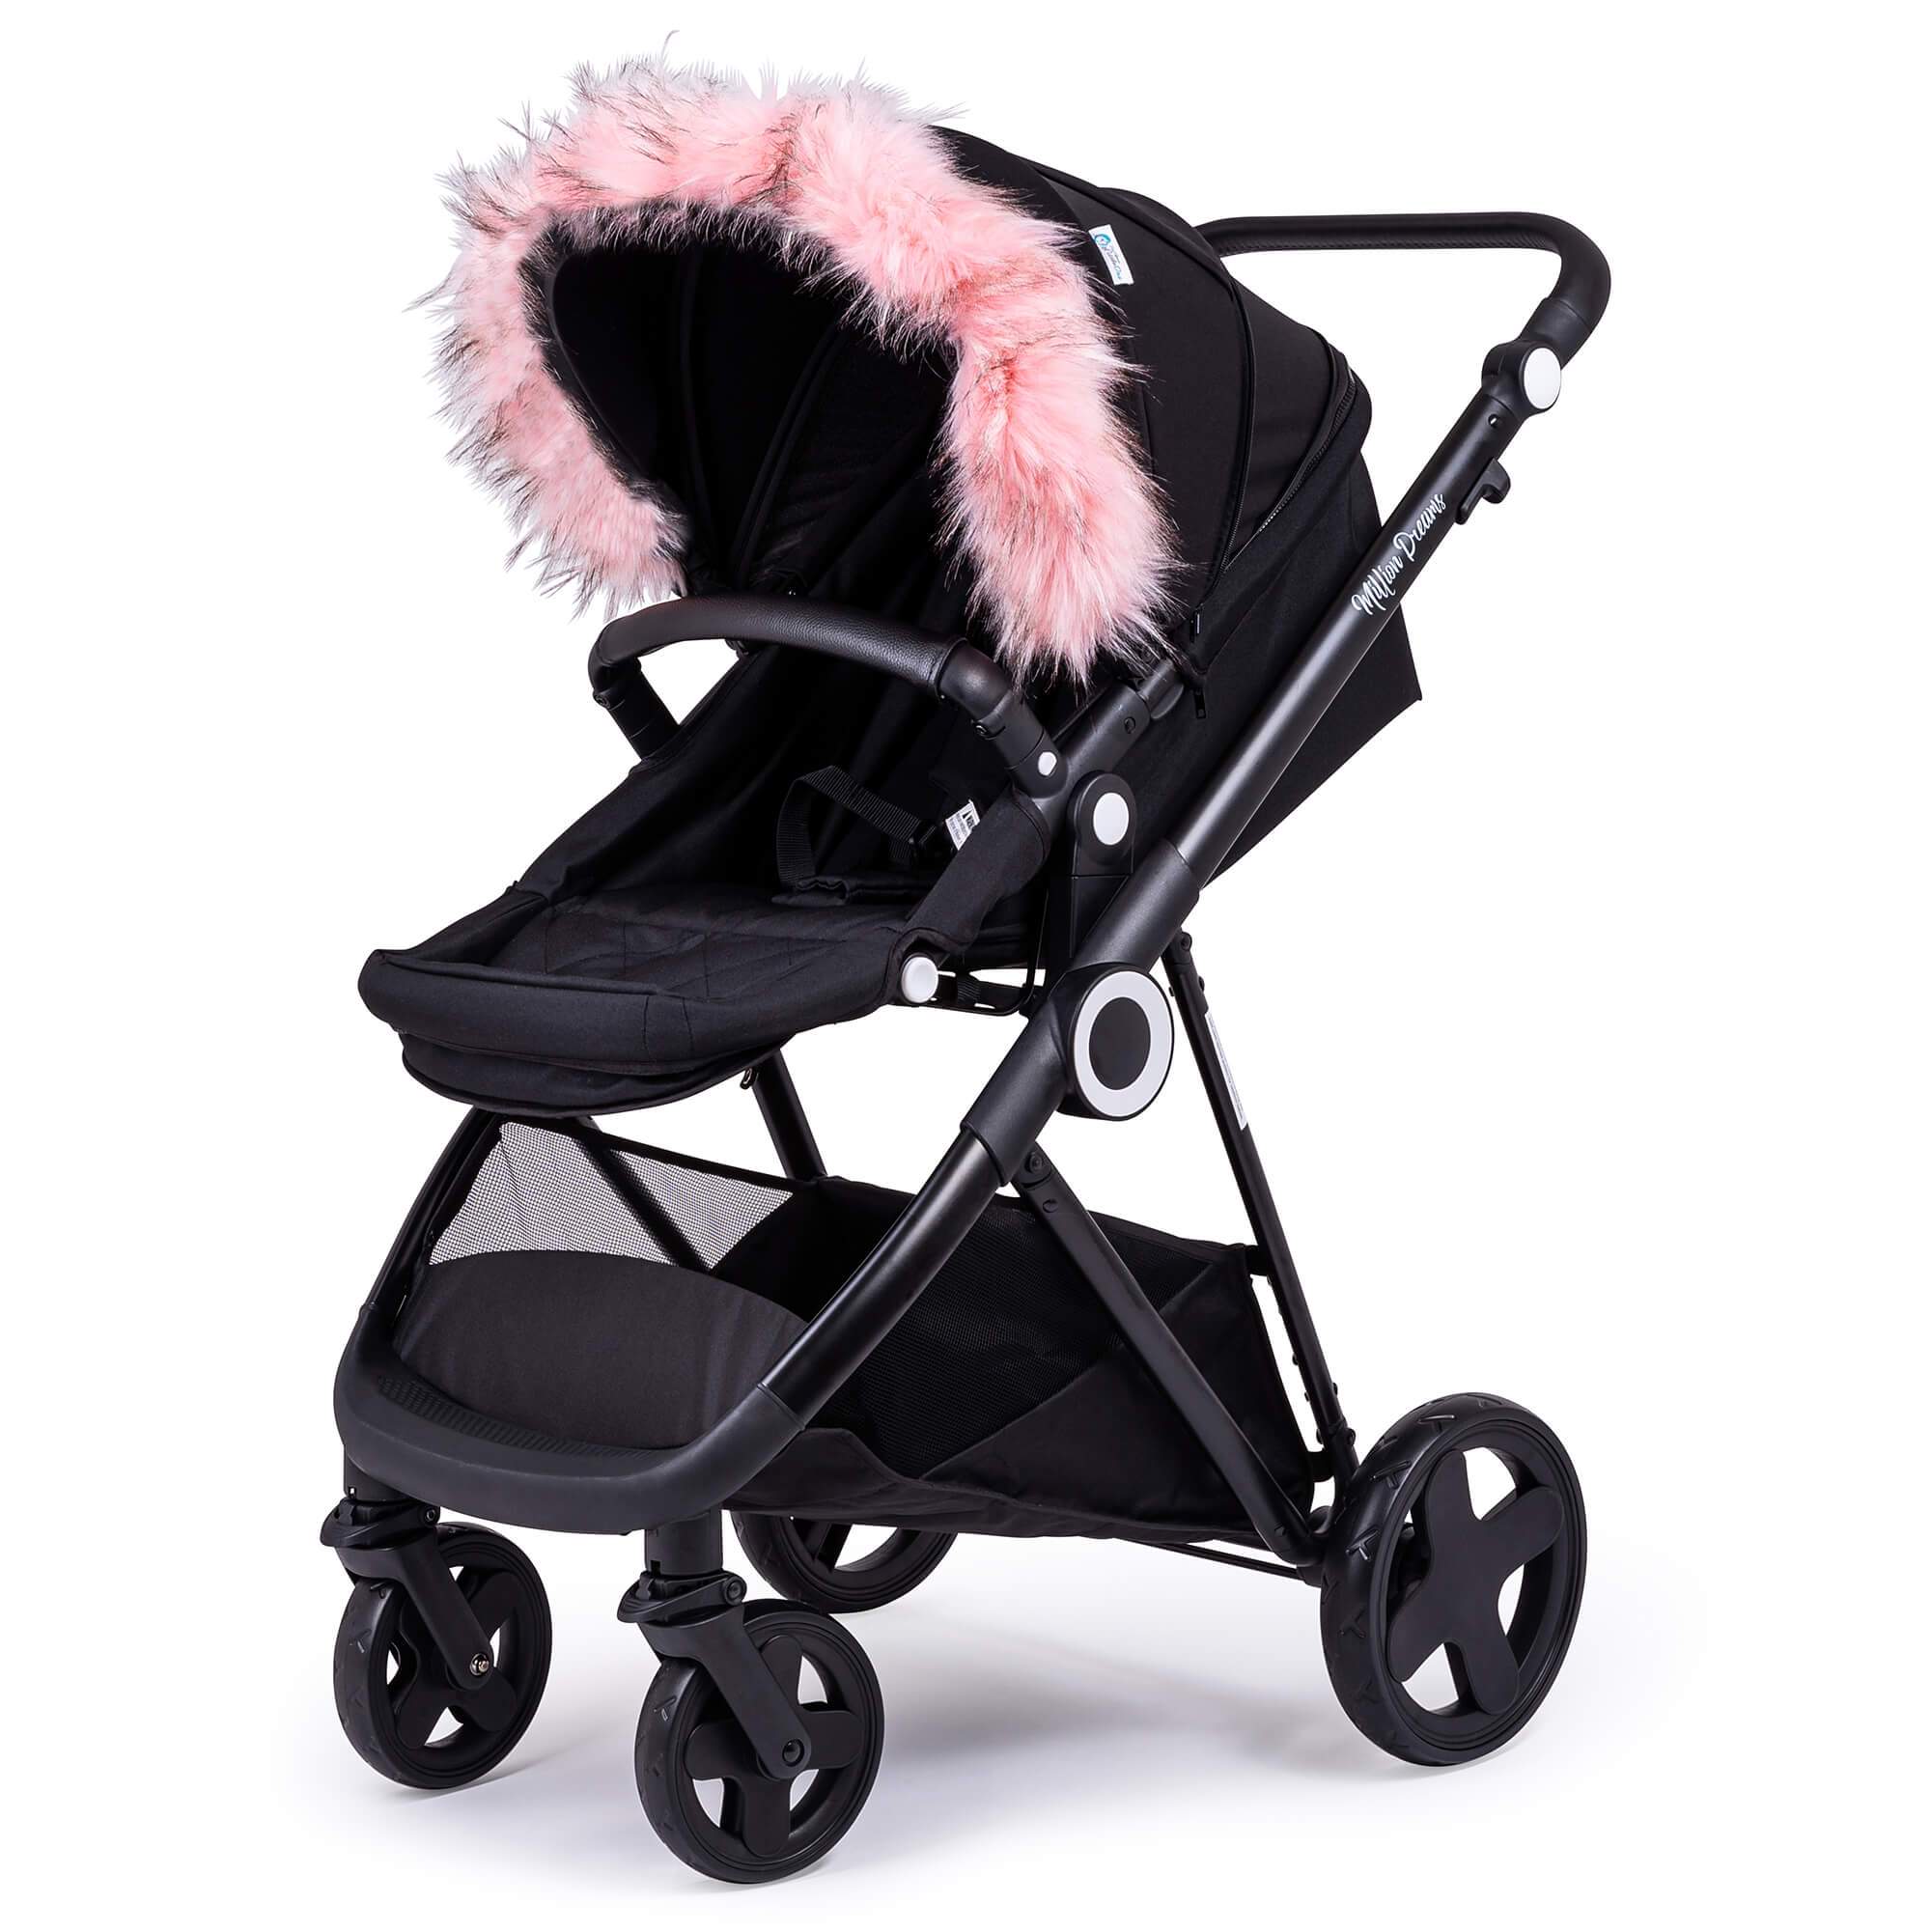 Pram Fur Hood Trim Attachment for Pushchair Compatible with Cosatto - Light Pink / Fits All Models | For Your Little One